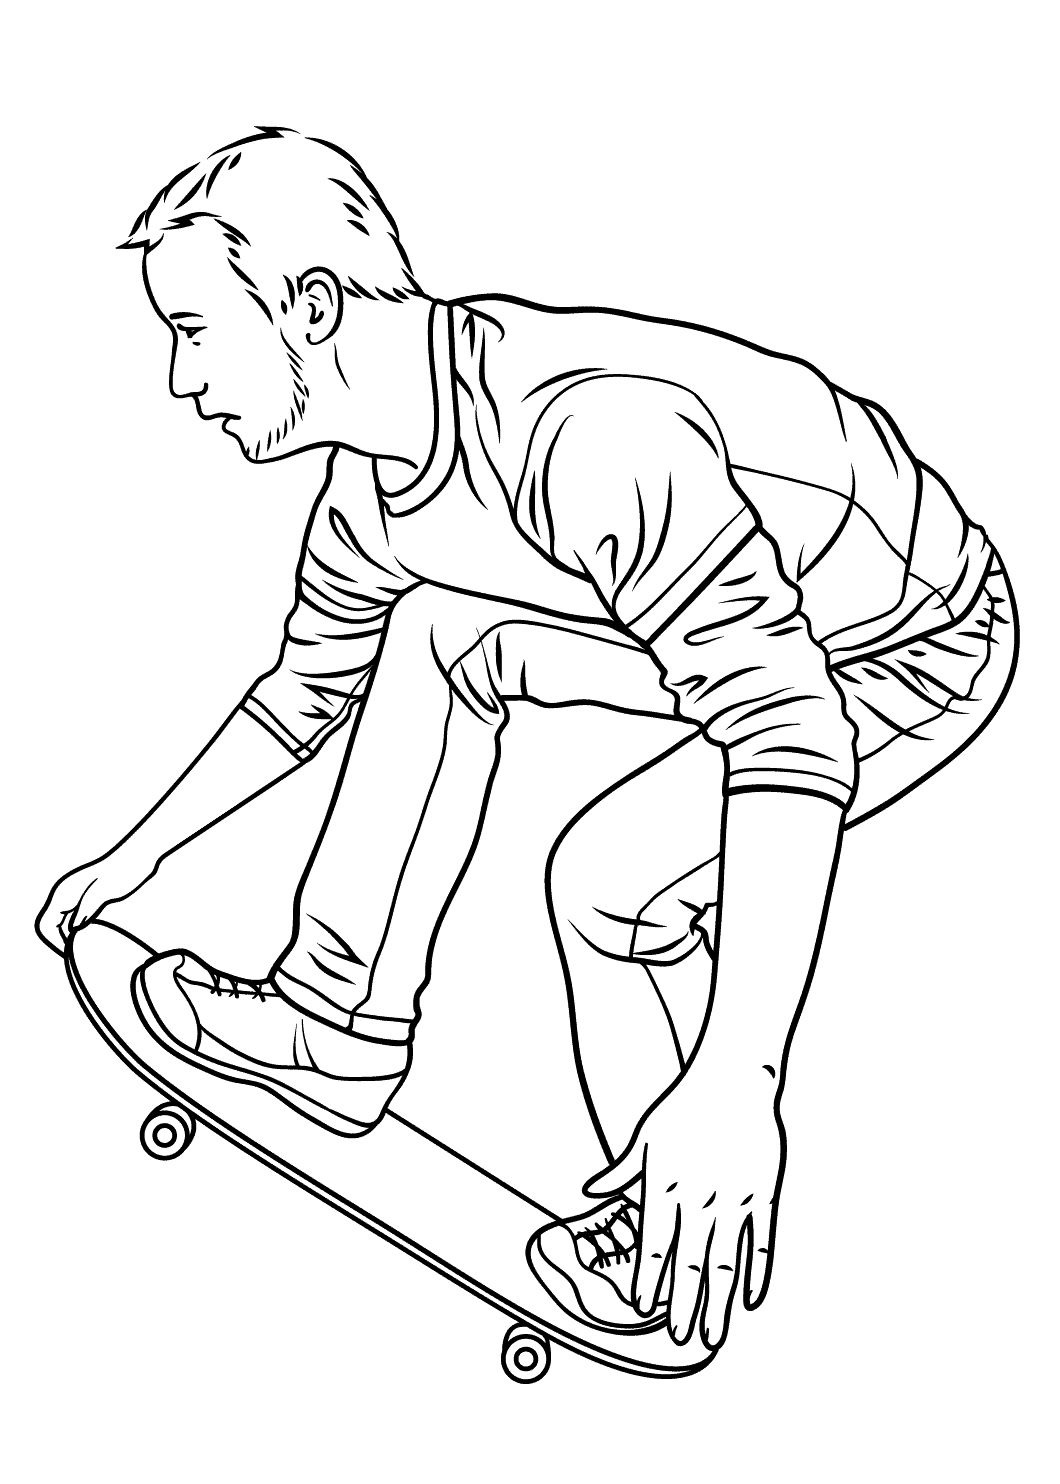 skateboarding coloring pages free